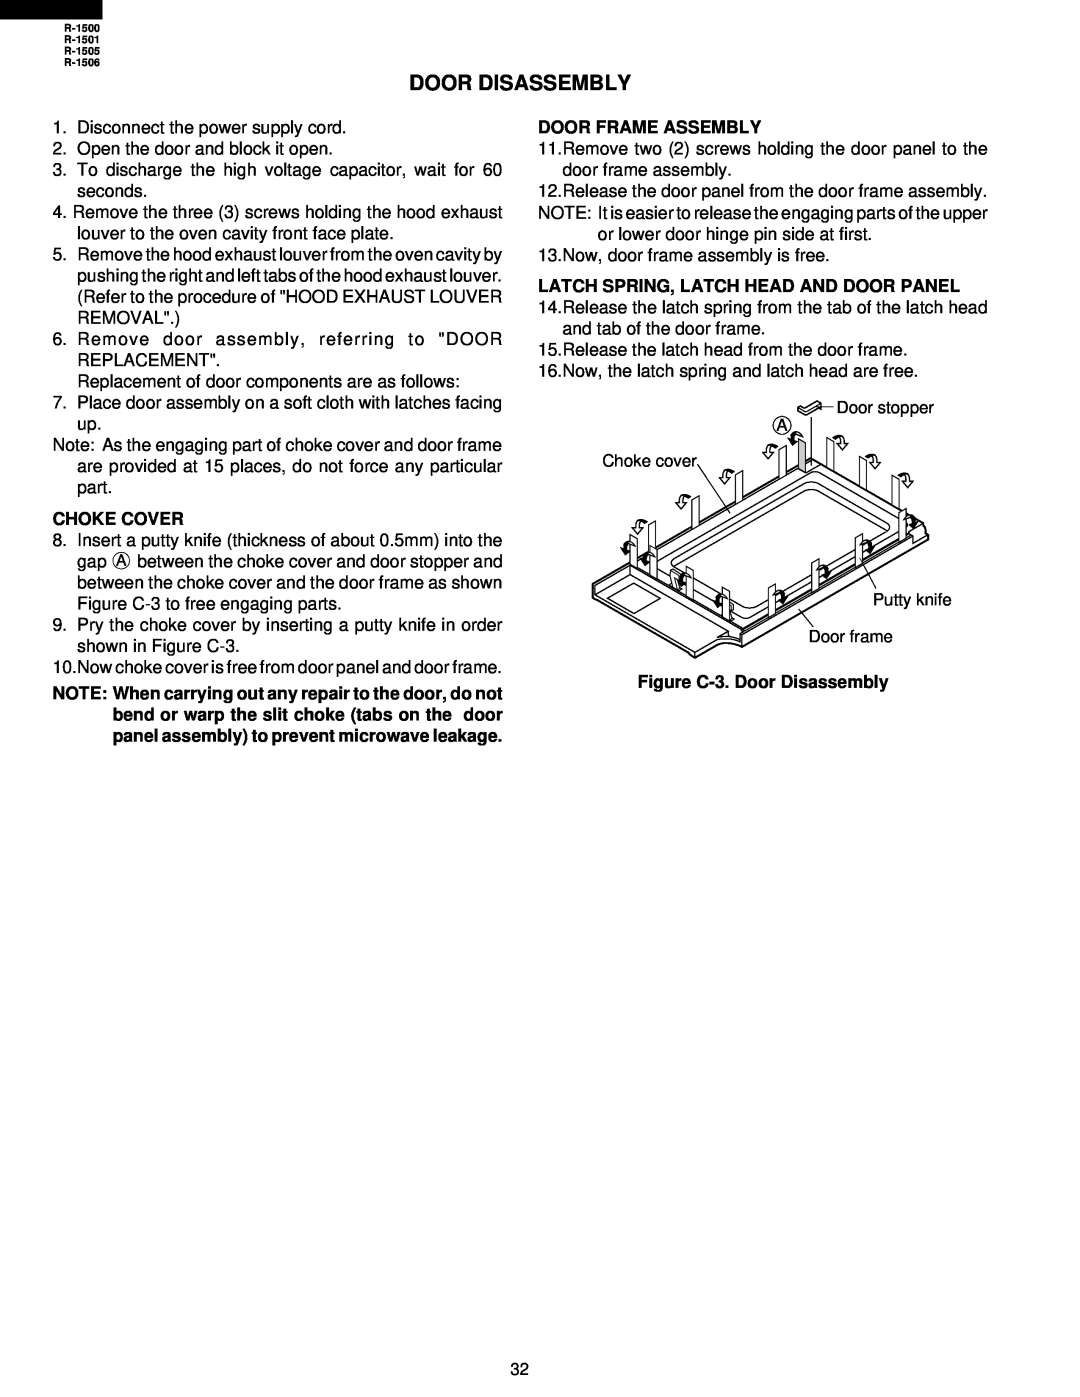 Sharp R-1501, R-1500, R-1505, R-1506 service manual Choke Cover, Door Frame Assembly, Figure C-3. Door Disassembly 